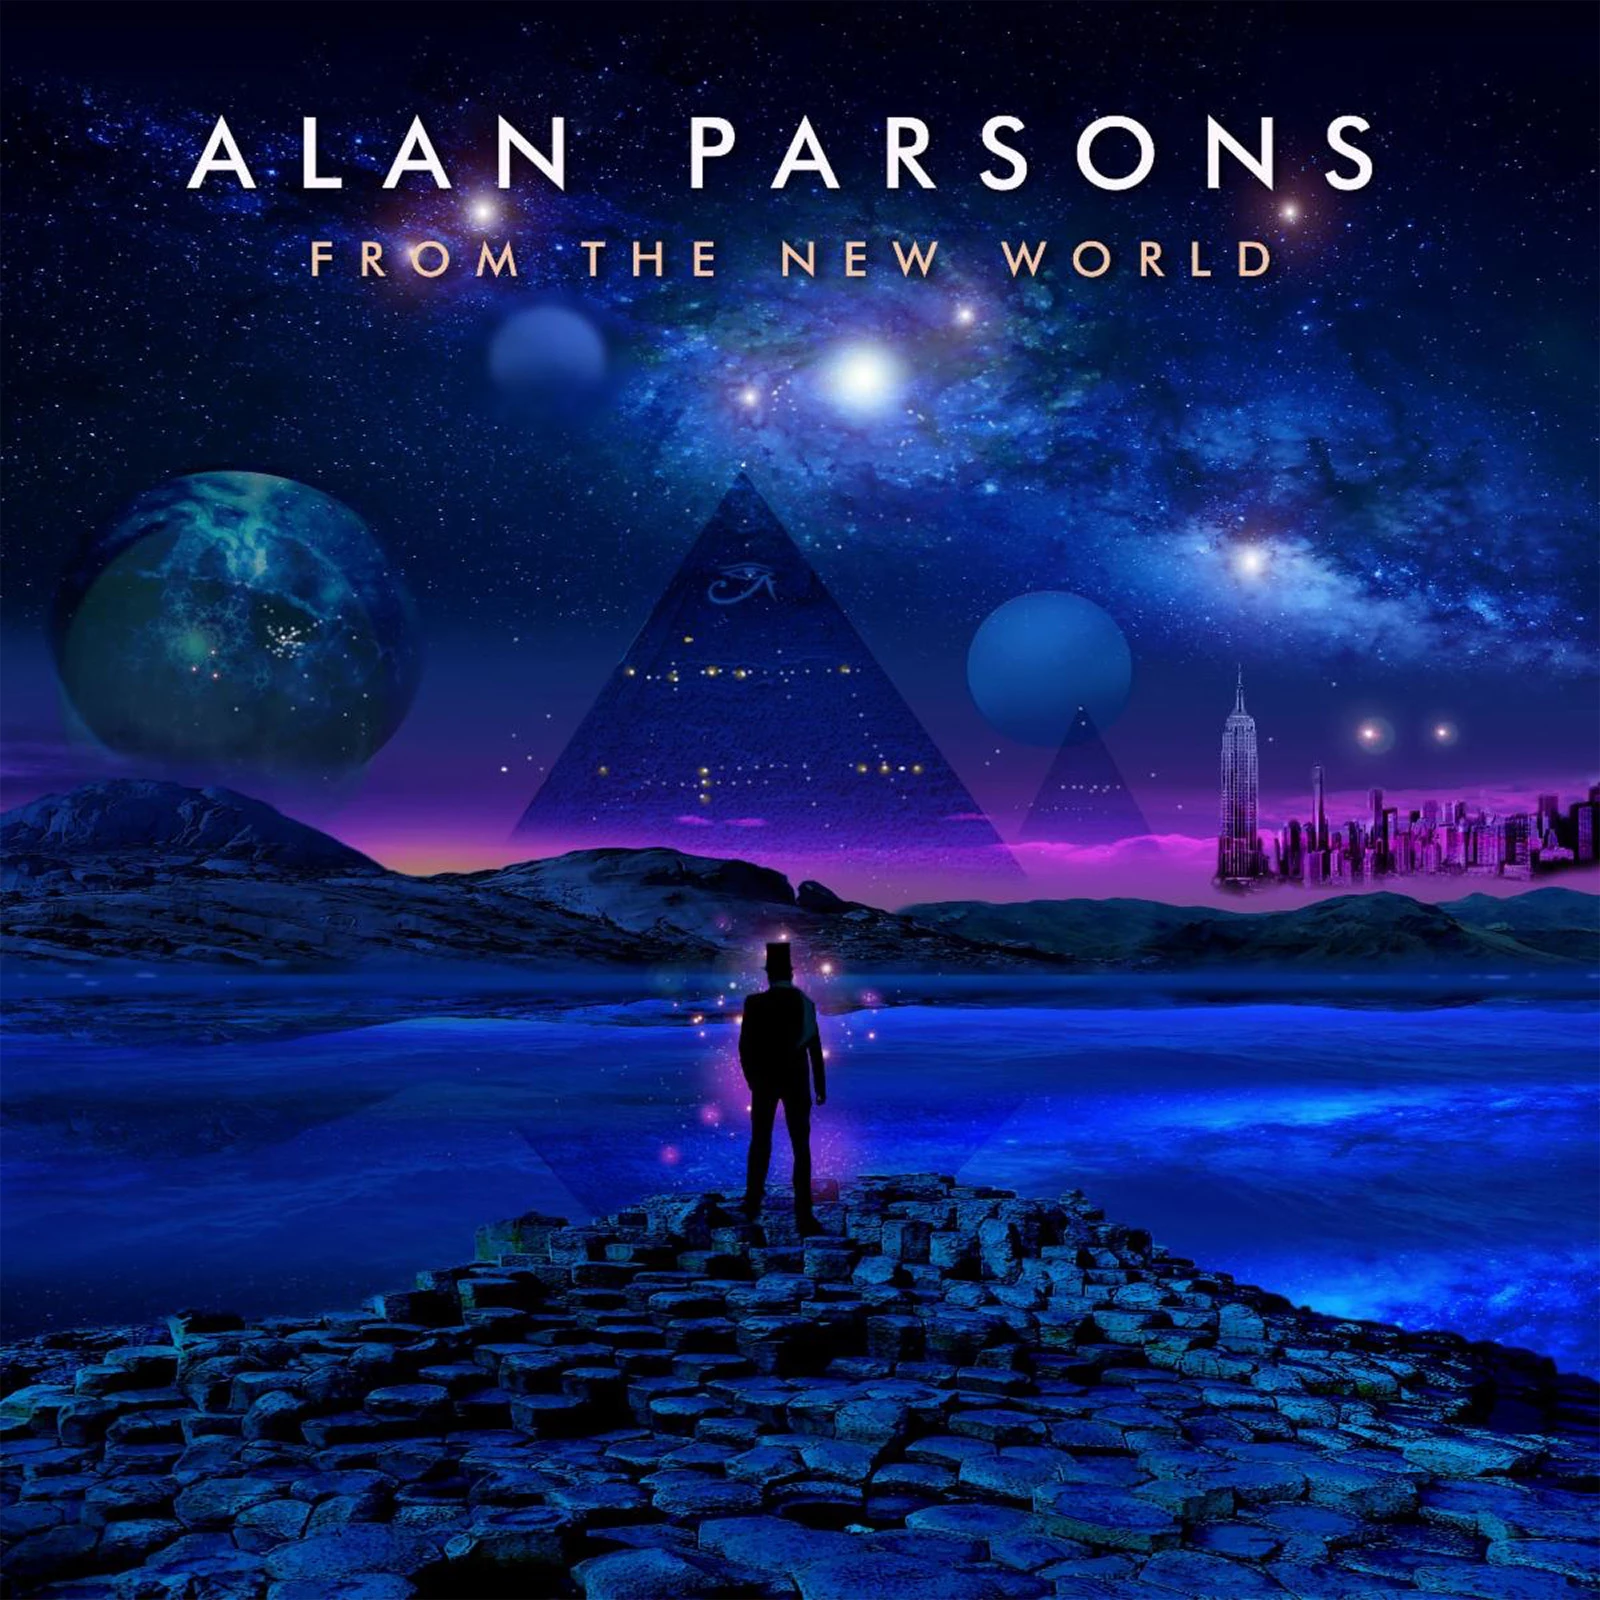 Alan Parsons to Release New Album, 'From the New World'